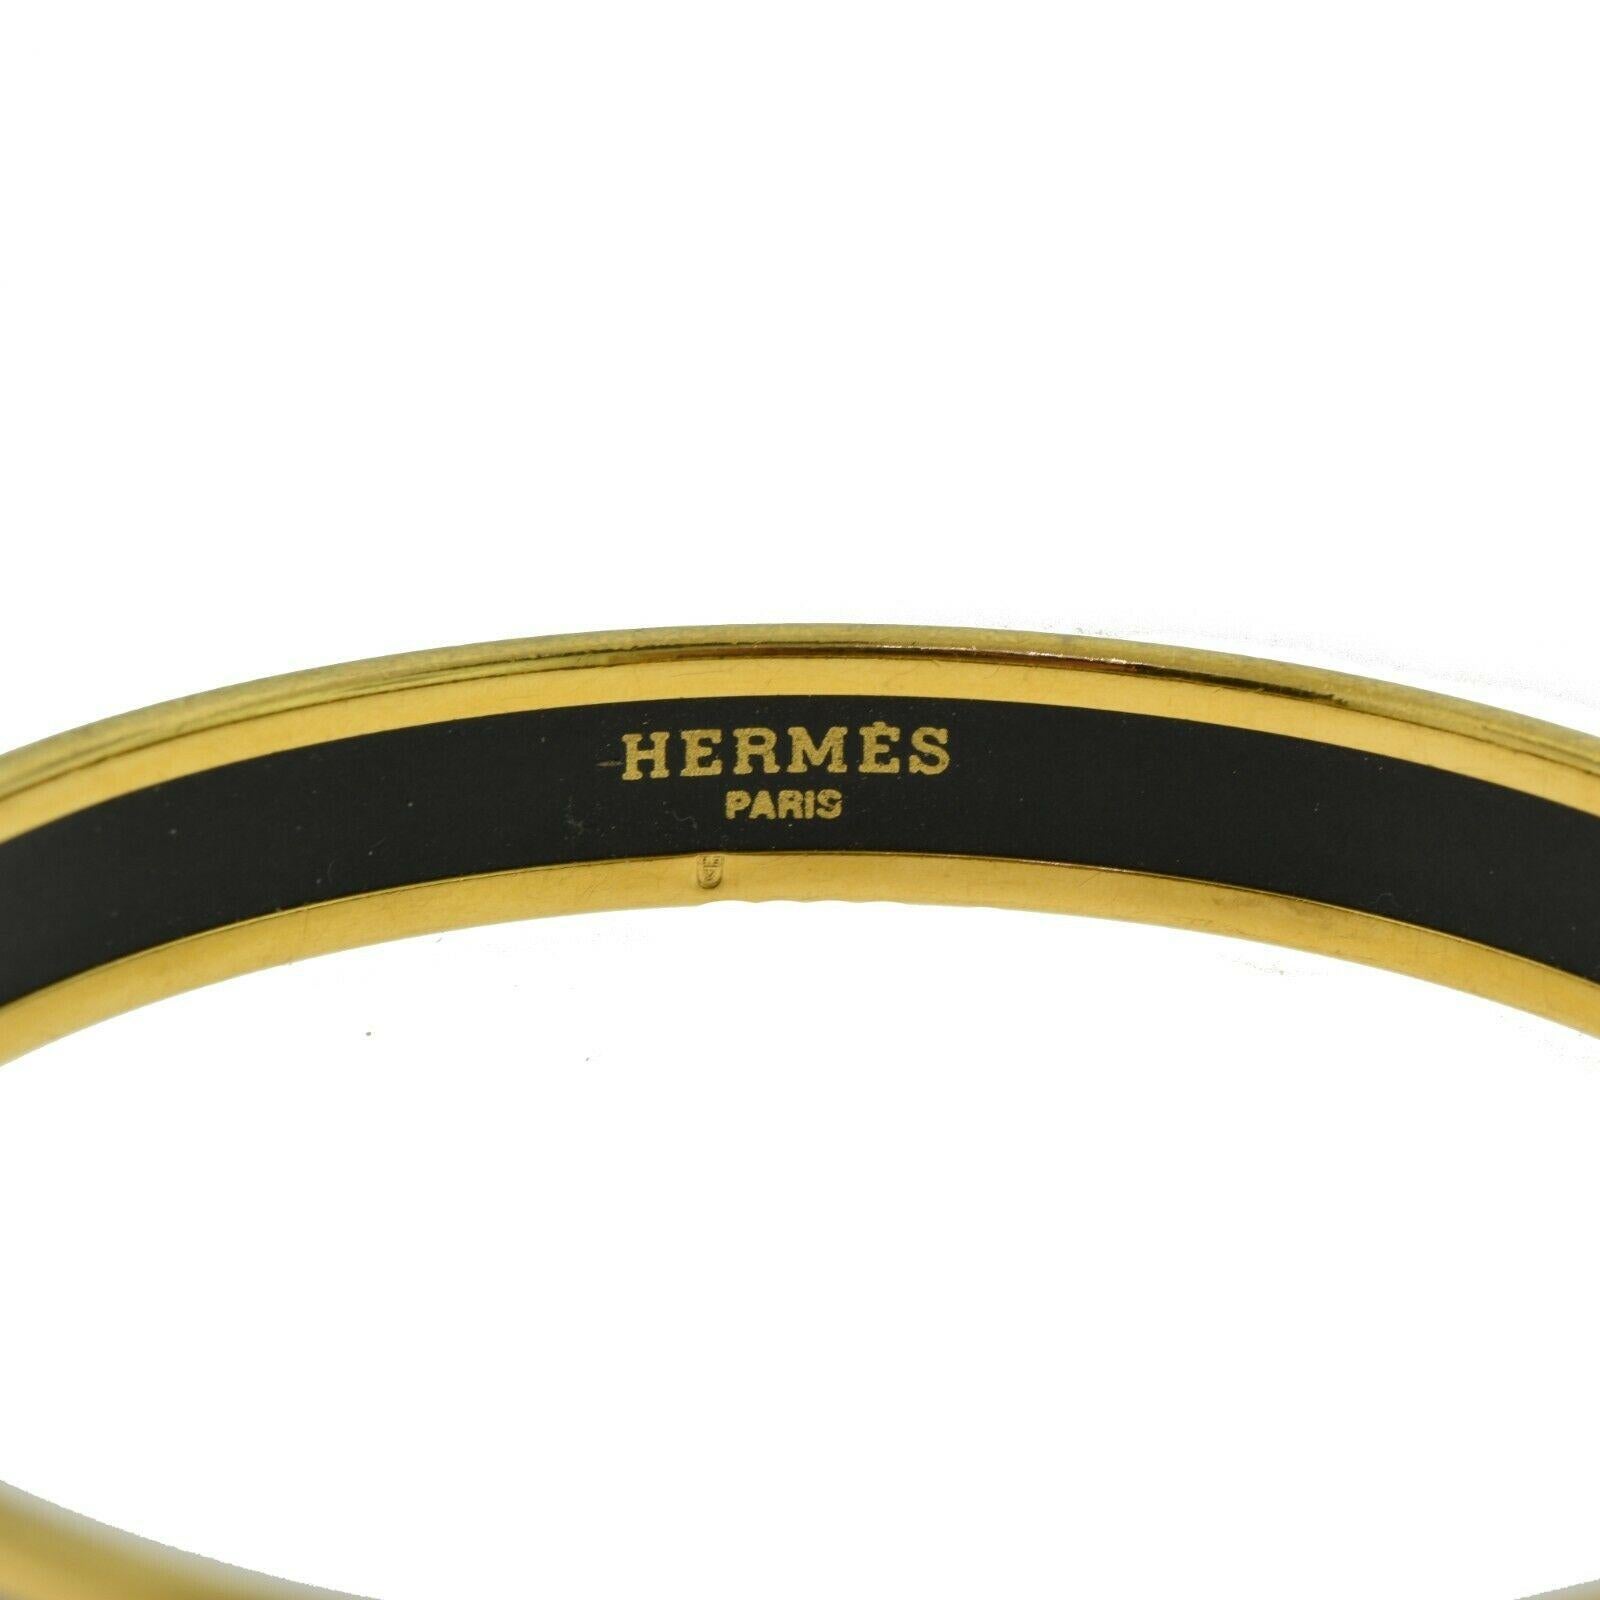 Brilliance Jewels, Miami
Questions? Call Us Anytime!
786,482,8100

Designer: Hermes

Collection: Enamel Jewelry

Material: Enamel, Gold Plated

Material Color: Blue, Orange, Yellow, Green

Hallmarks: Hermes Paris, Made in Austria +